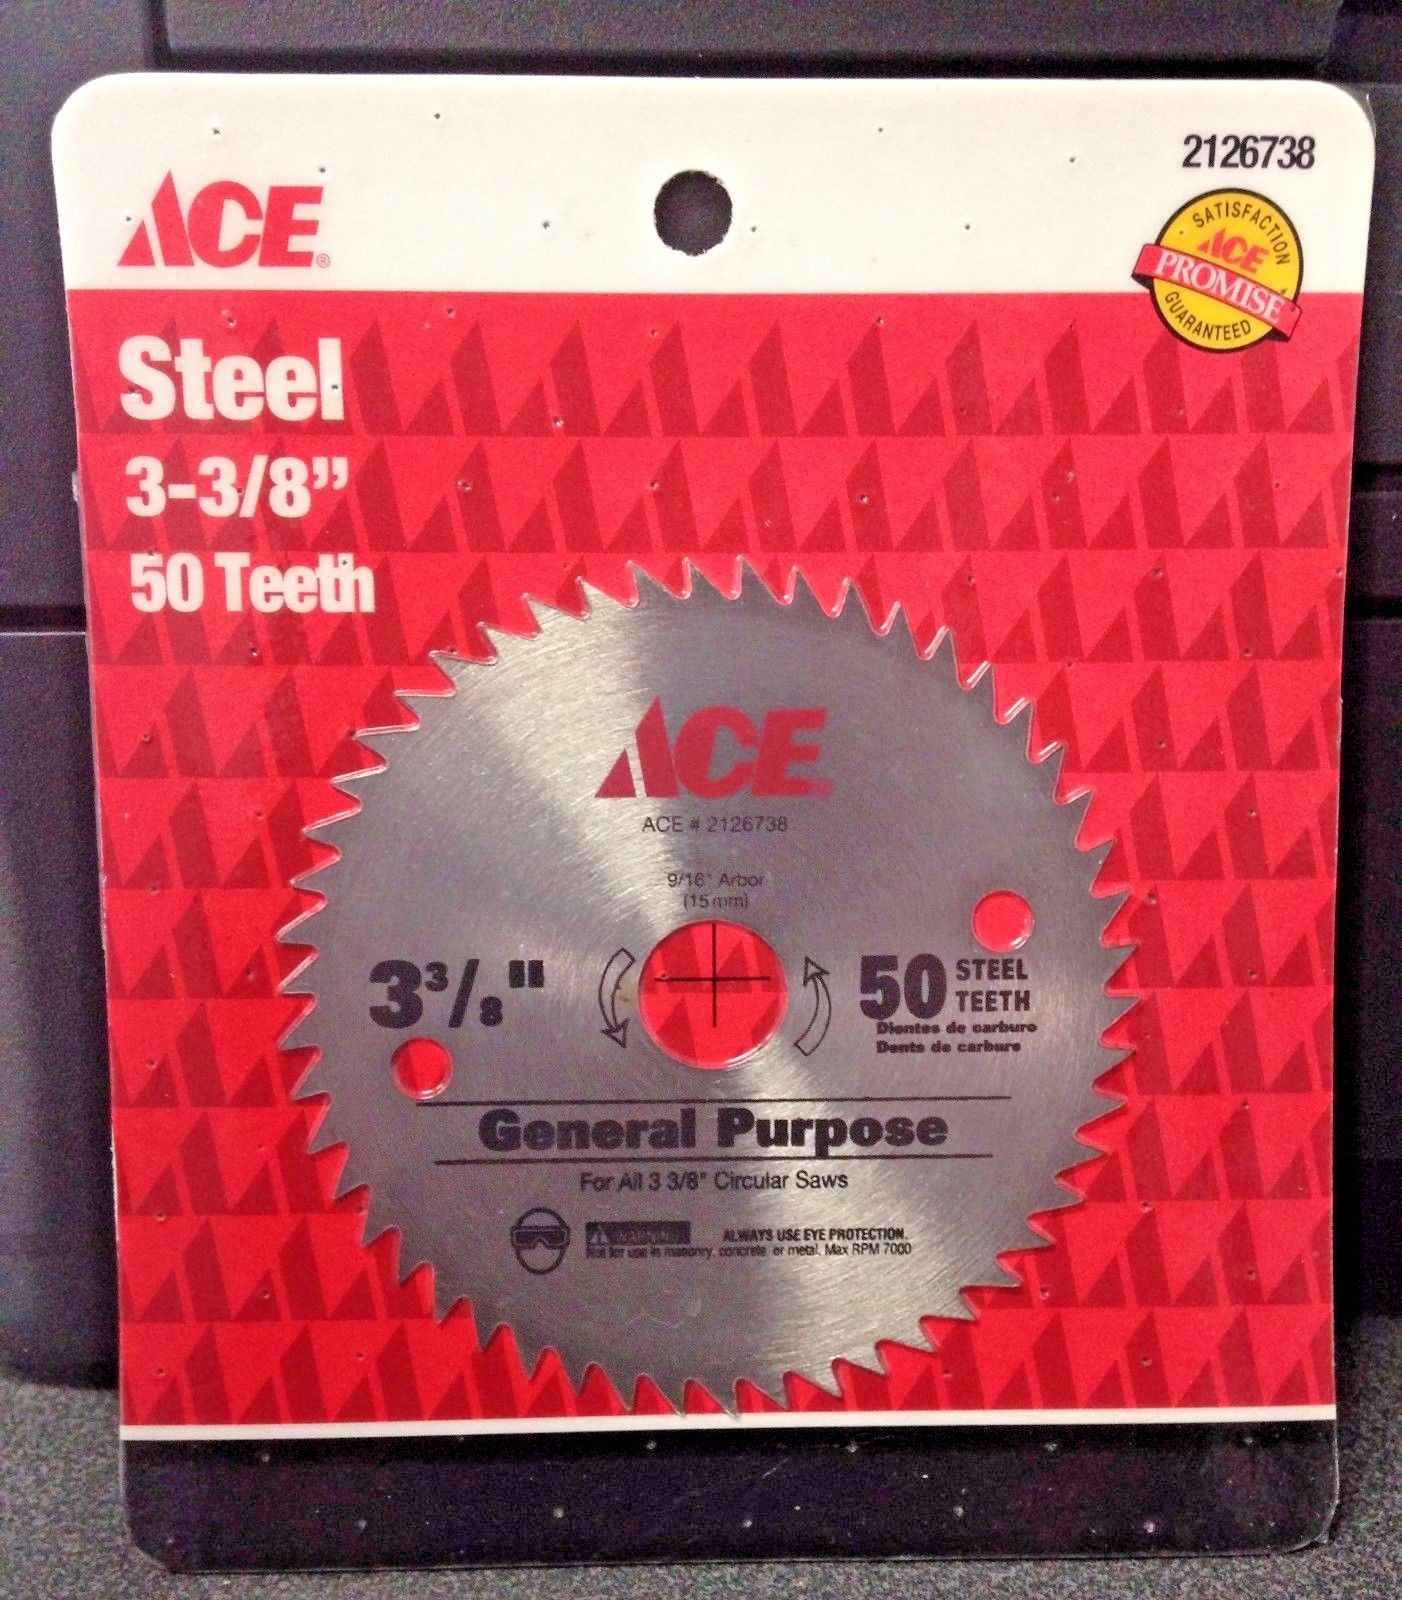 Ace 2126738 3-3/8" x 50 Tooth Steel Saw Blade